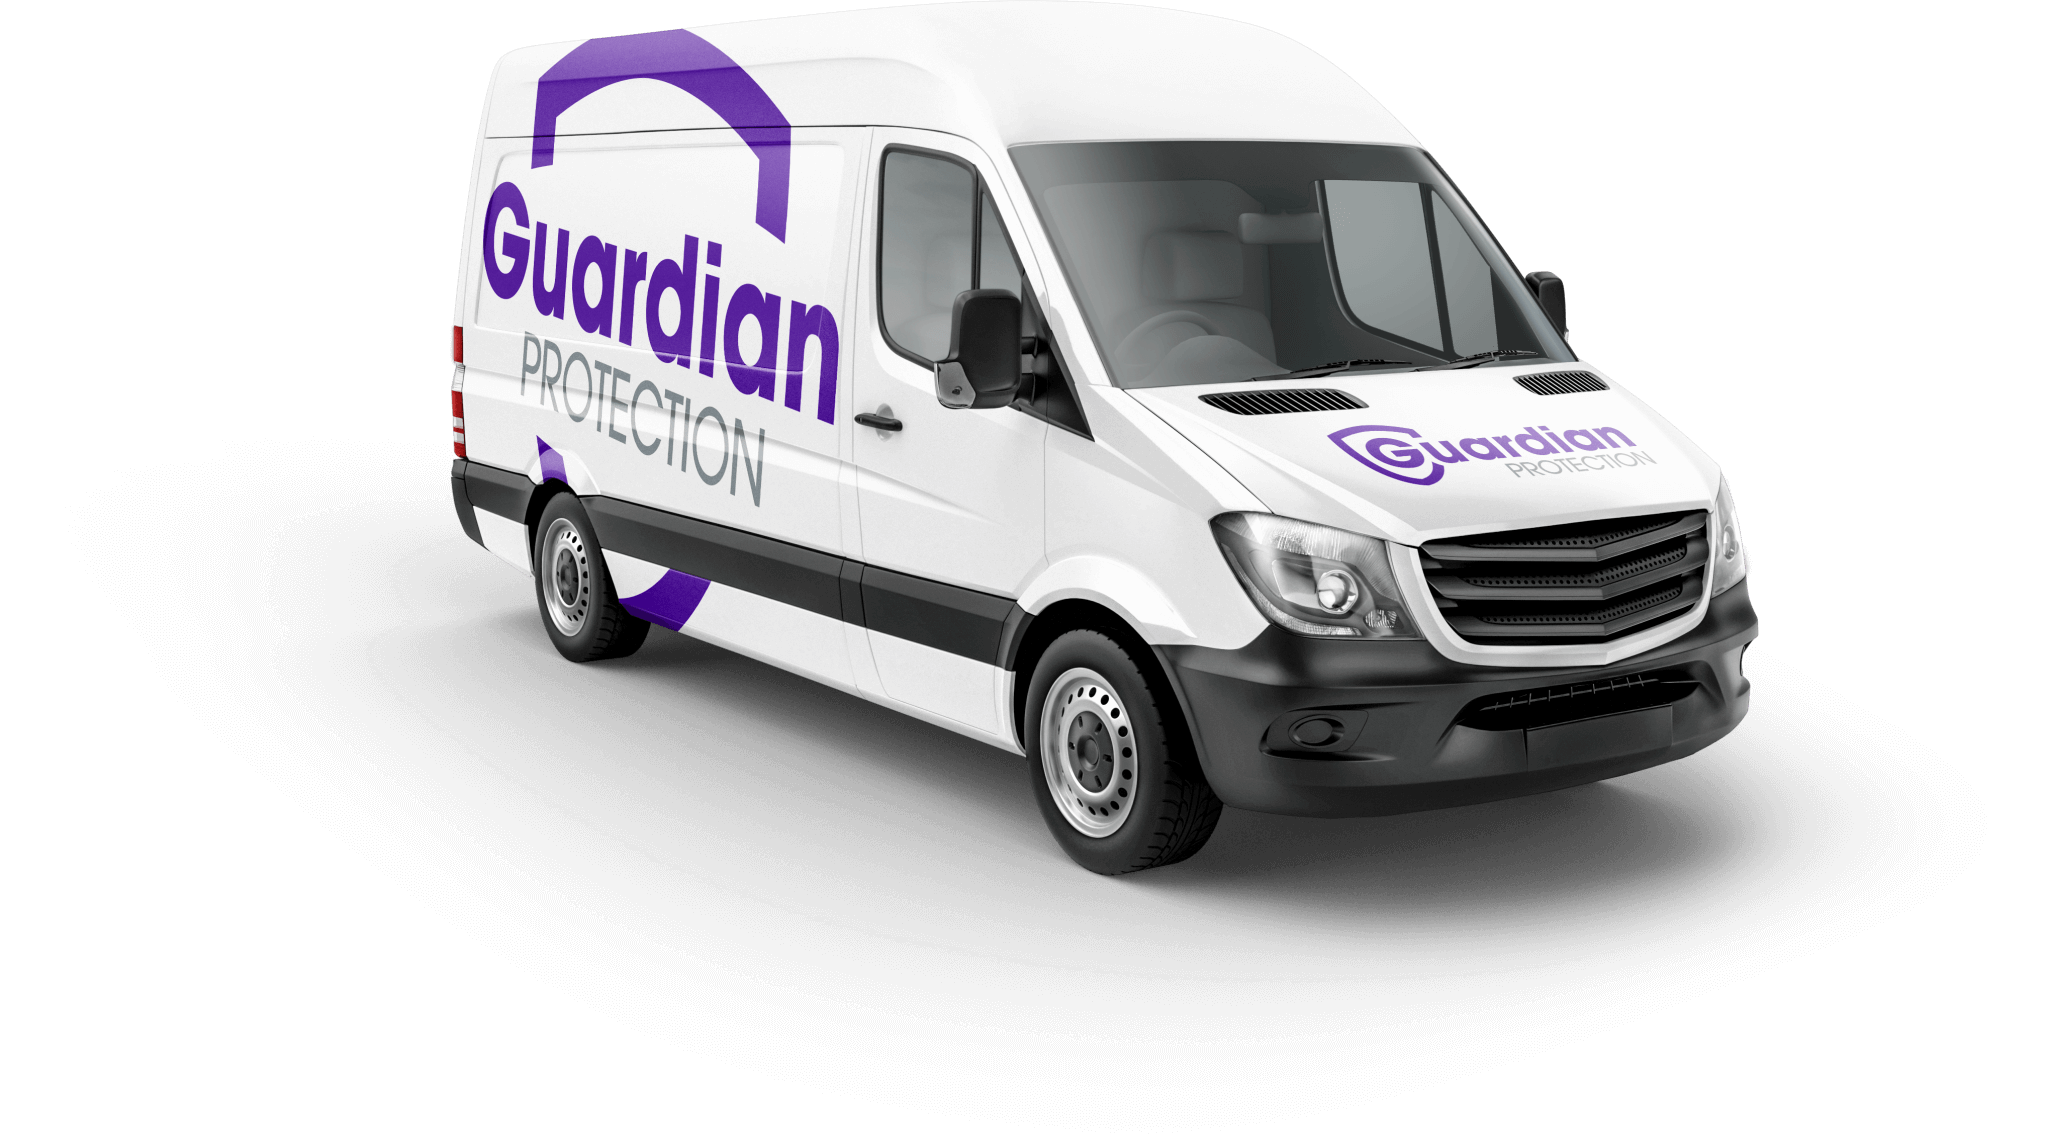 Image of a Guardian Protection Van